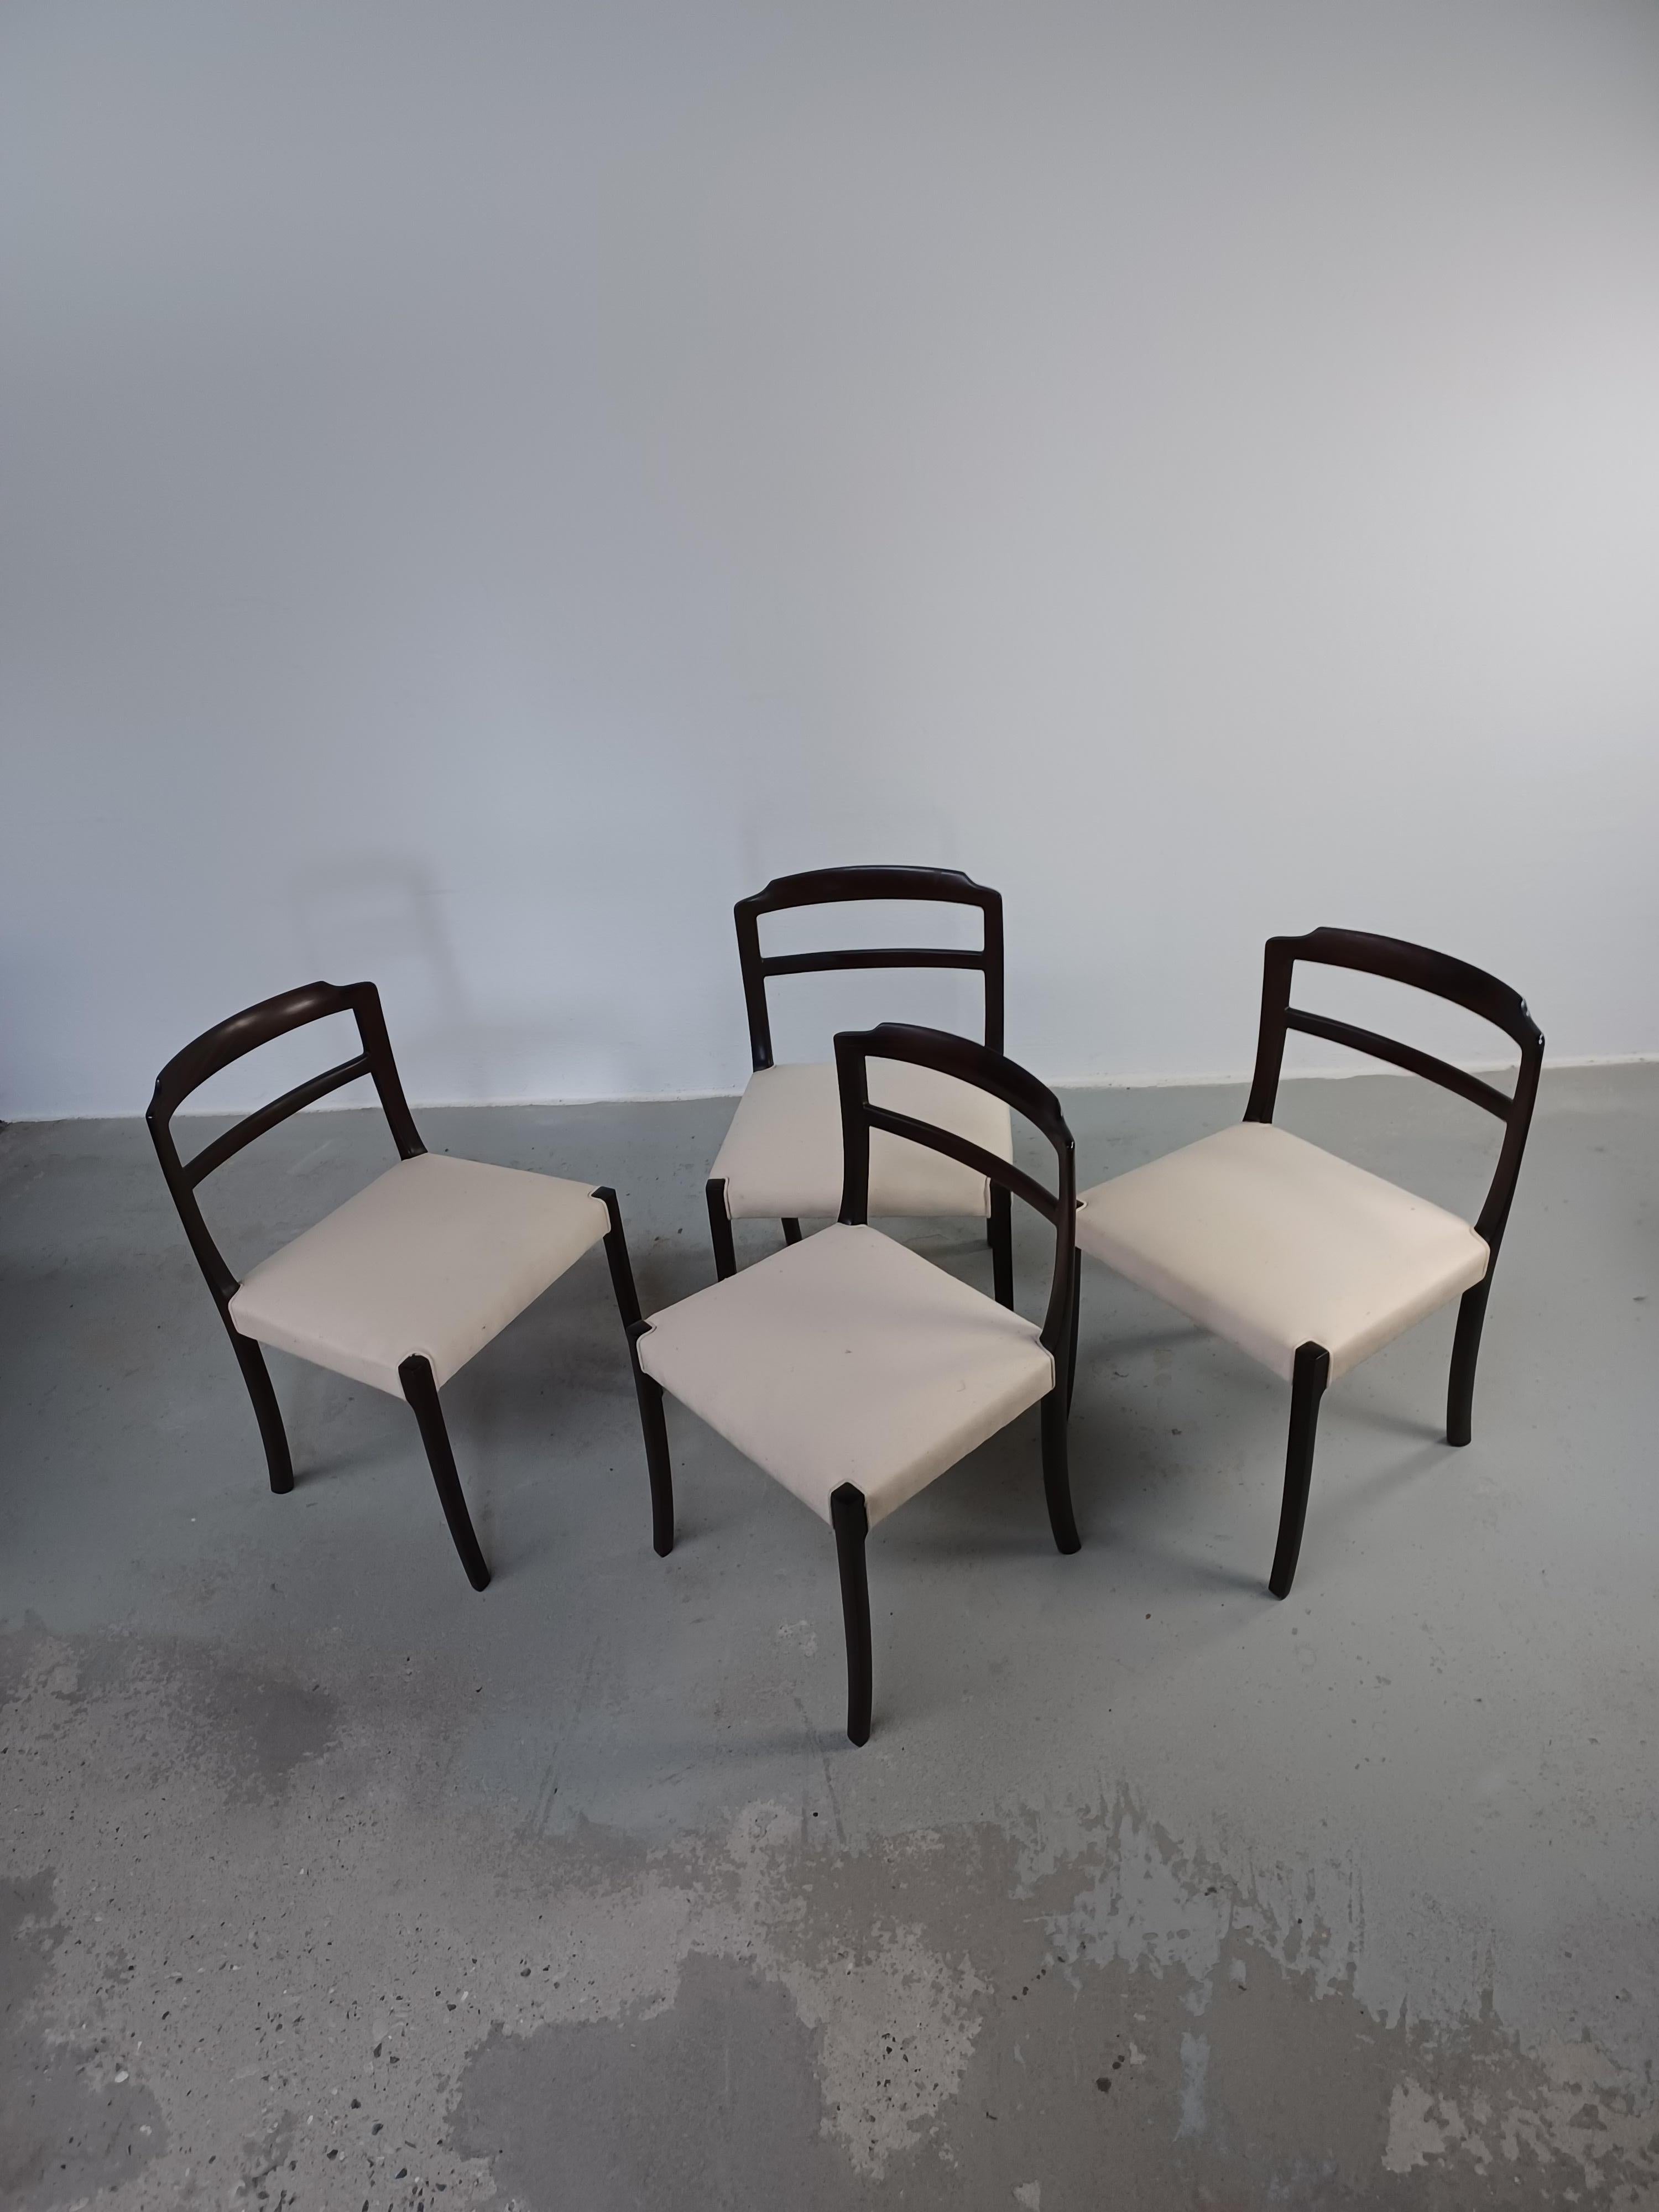 1960's four fully restored Ole Wanscher mahogany dining chairs custom upholstery

The set features a well well designed and well crafted mid-century modern set of chairs with Ole Wanschers well developed sense of proportions and top craftmanship